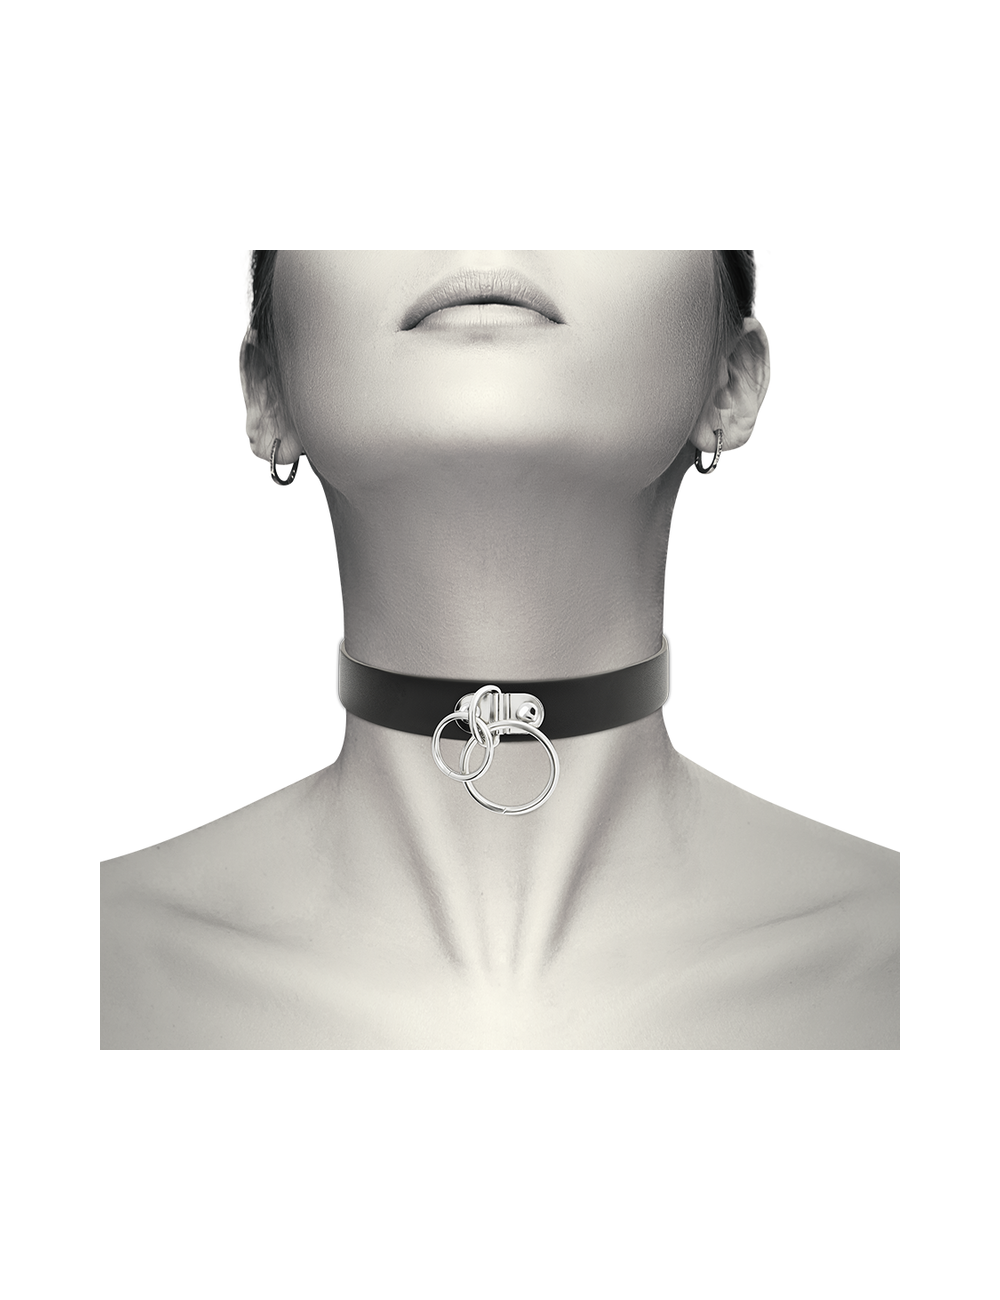 Sextoys - Bondage - SM - COQUETTE HAND CRAFTED CHOKER VEGAN LEATHER - DOUBLE RING - Coquette Accessories